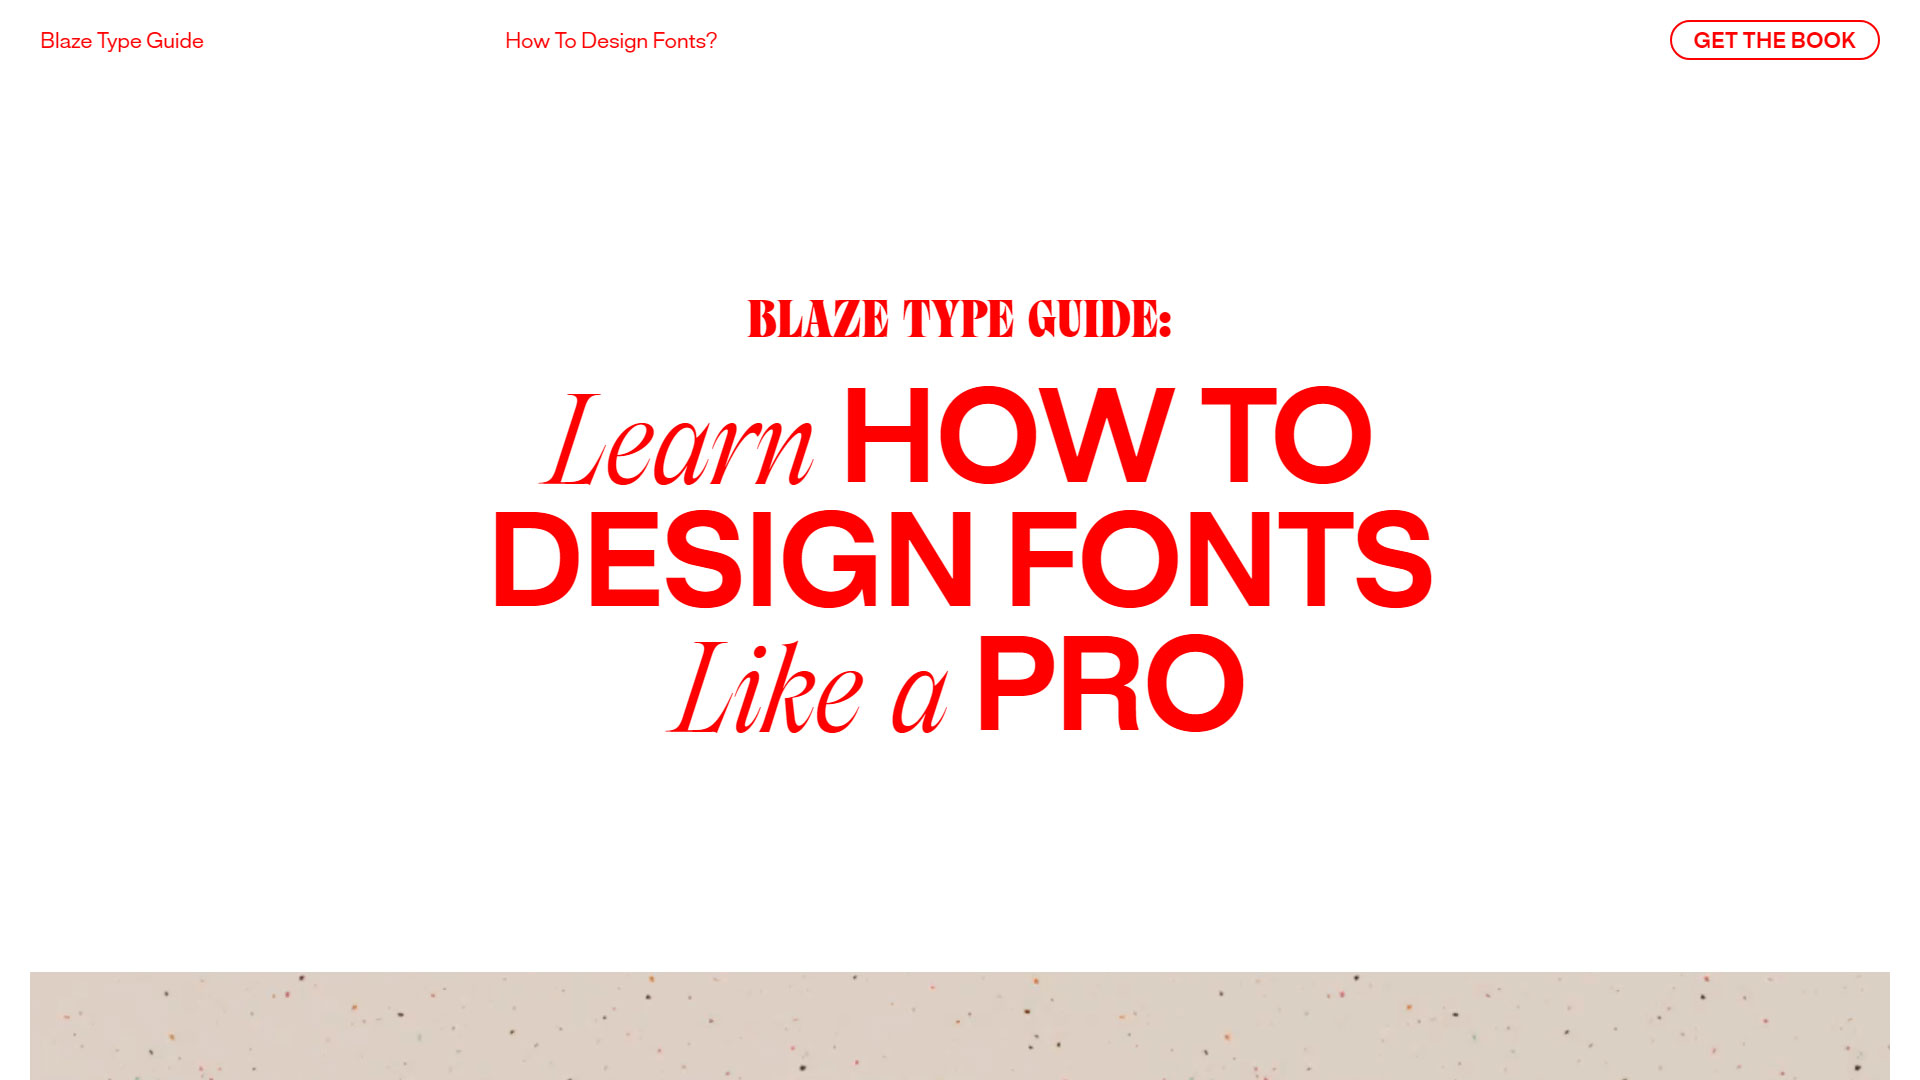 How to Design Fonts?